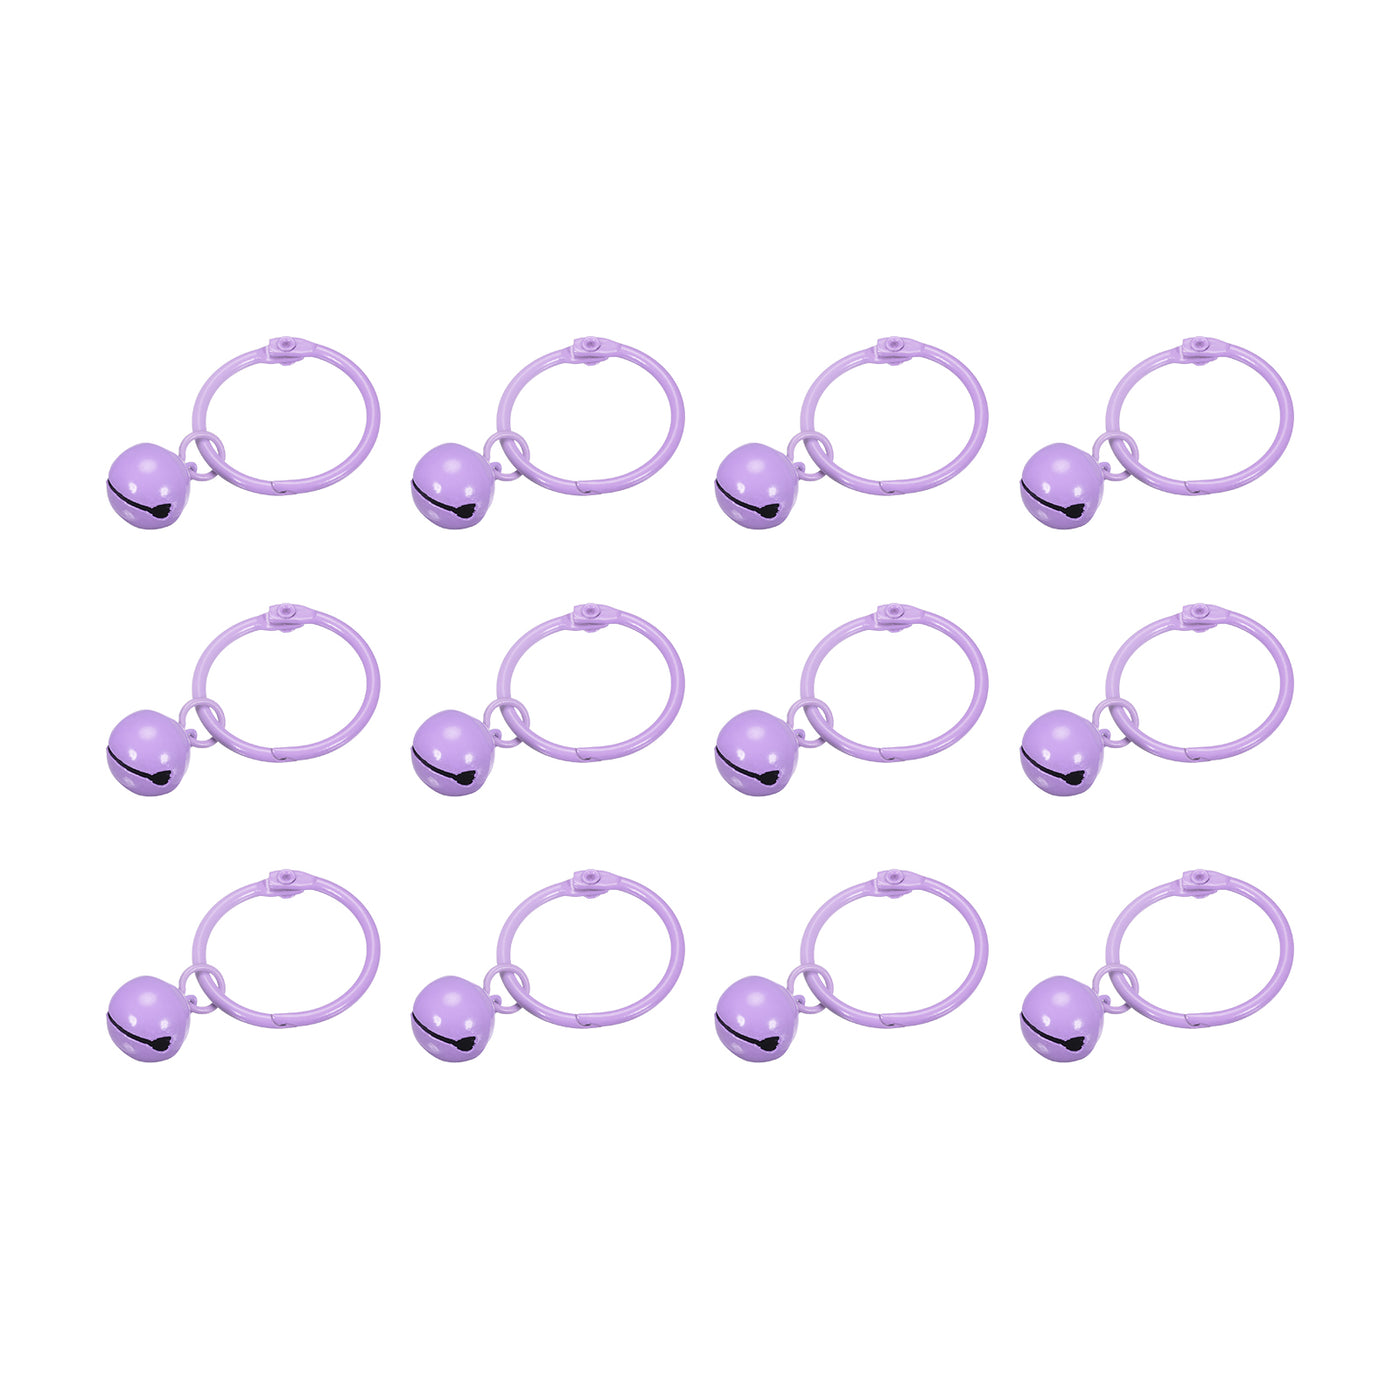 uxcell Uxcell 12Pcs Keyrings with Bells, Purple 30mm/0.51" Dia Jingle Bell for DIY Crafts